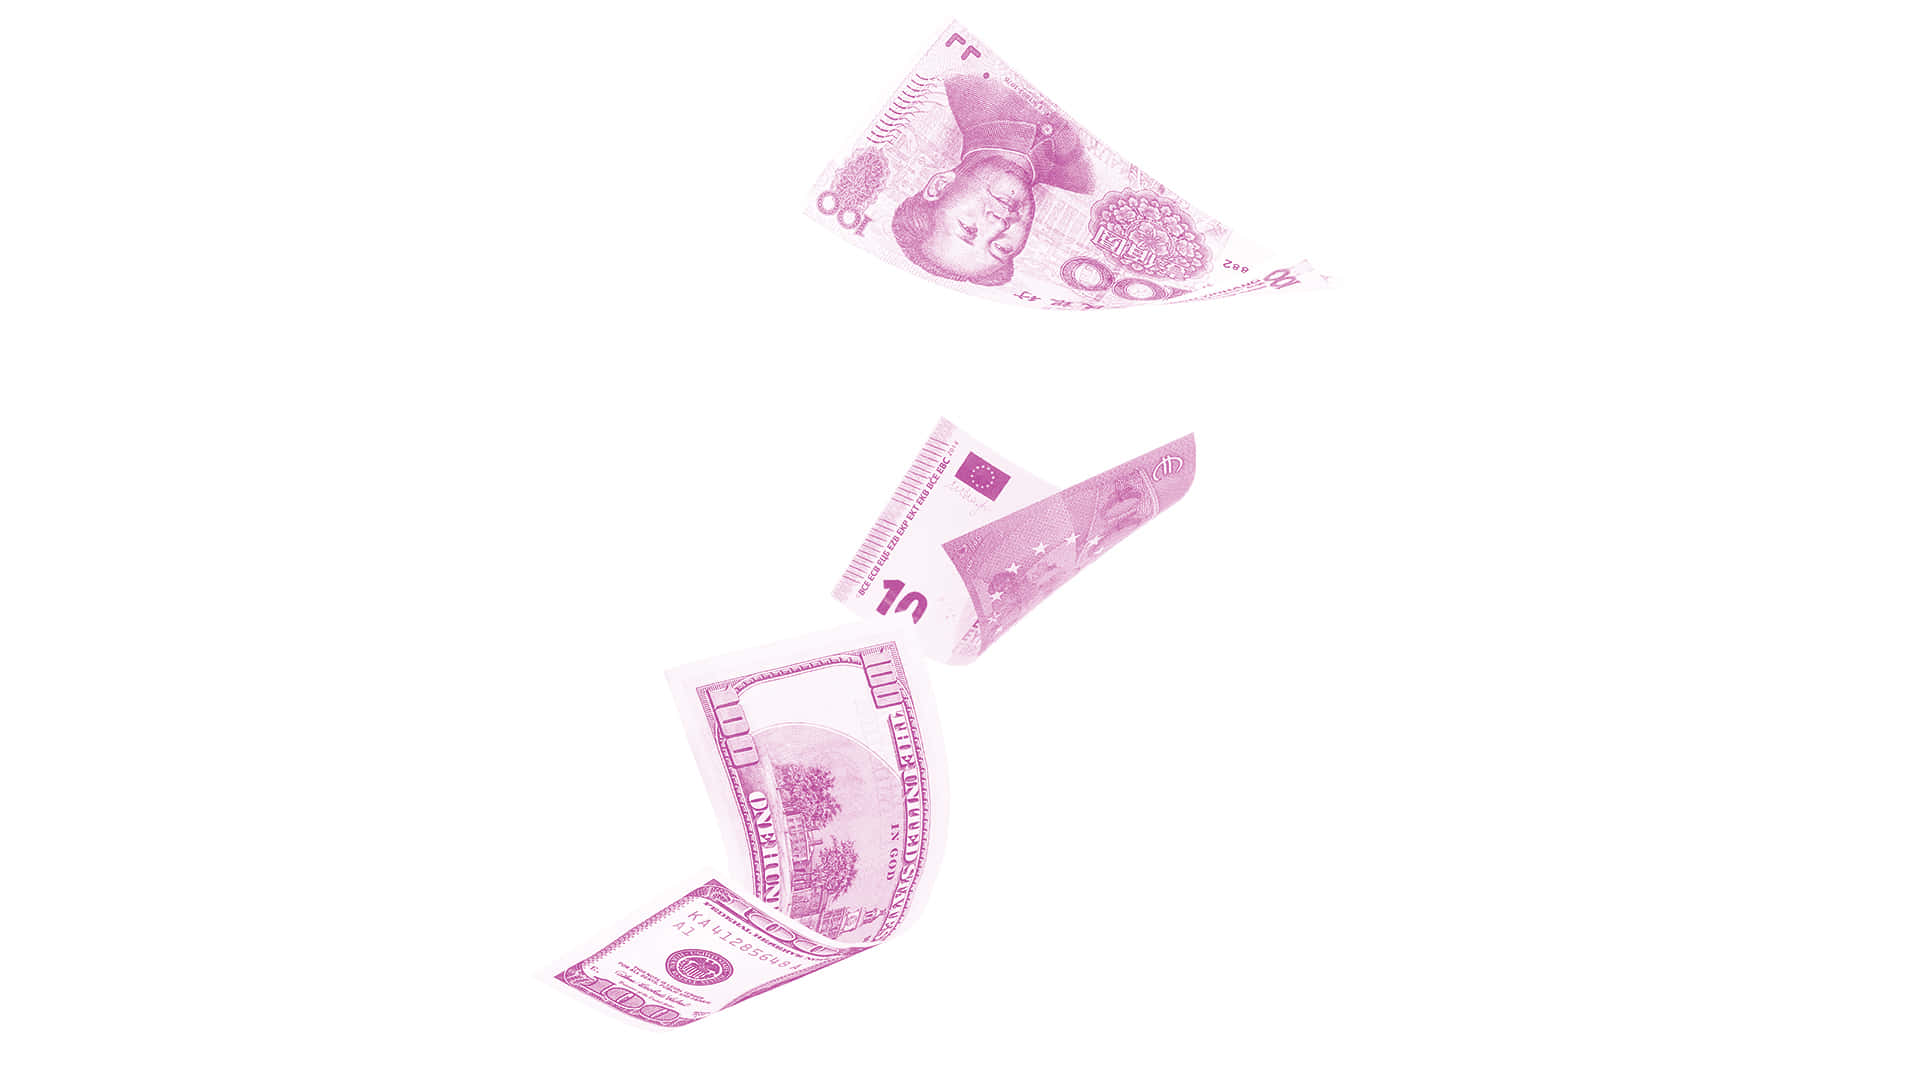 A Pink Dollar Bill Flying In The Air